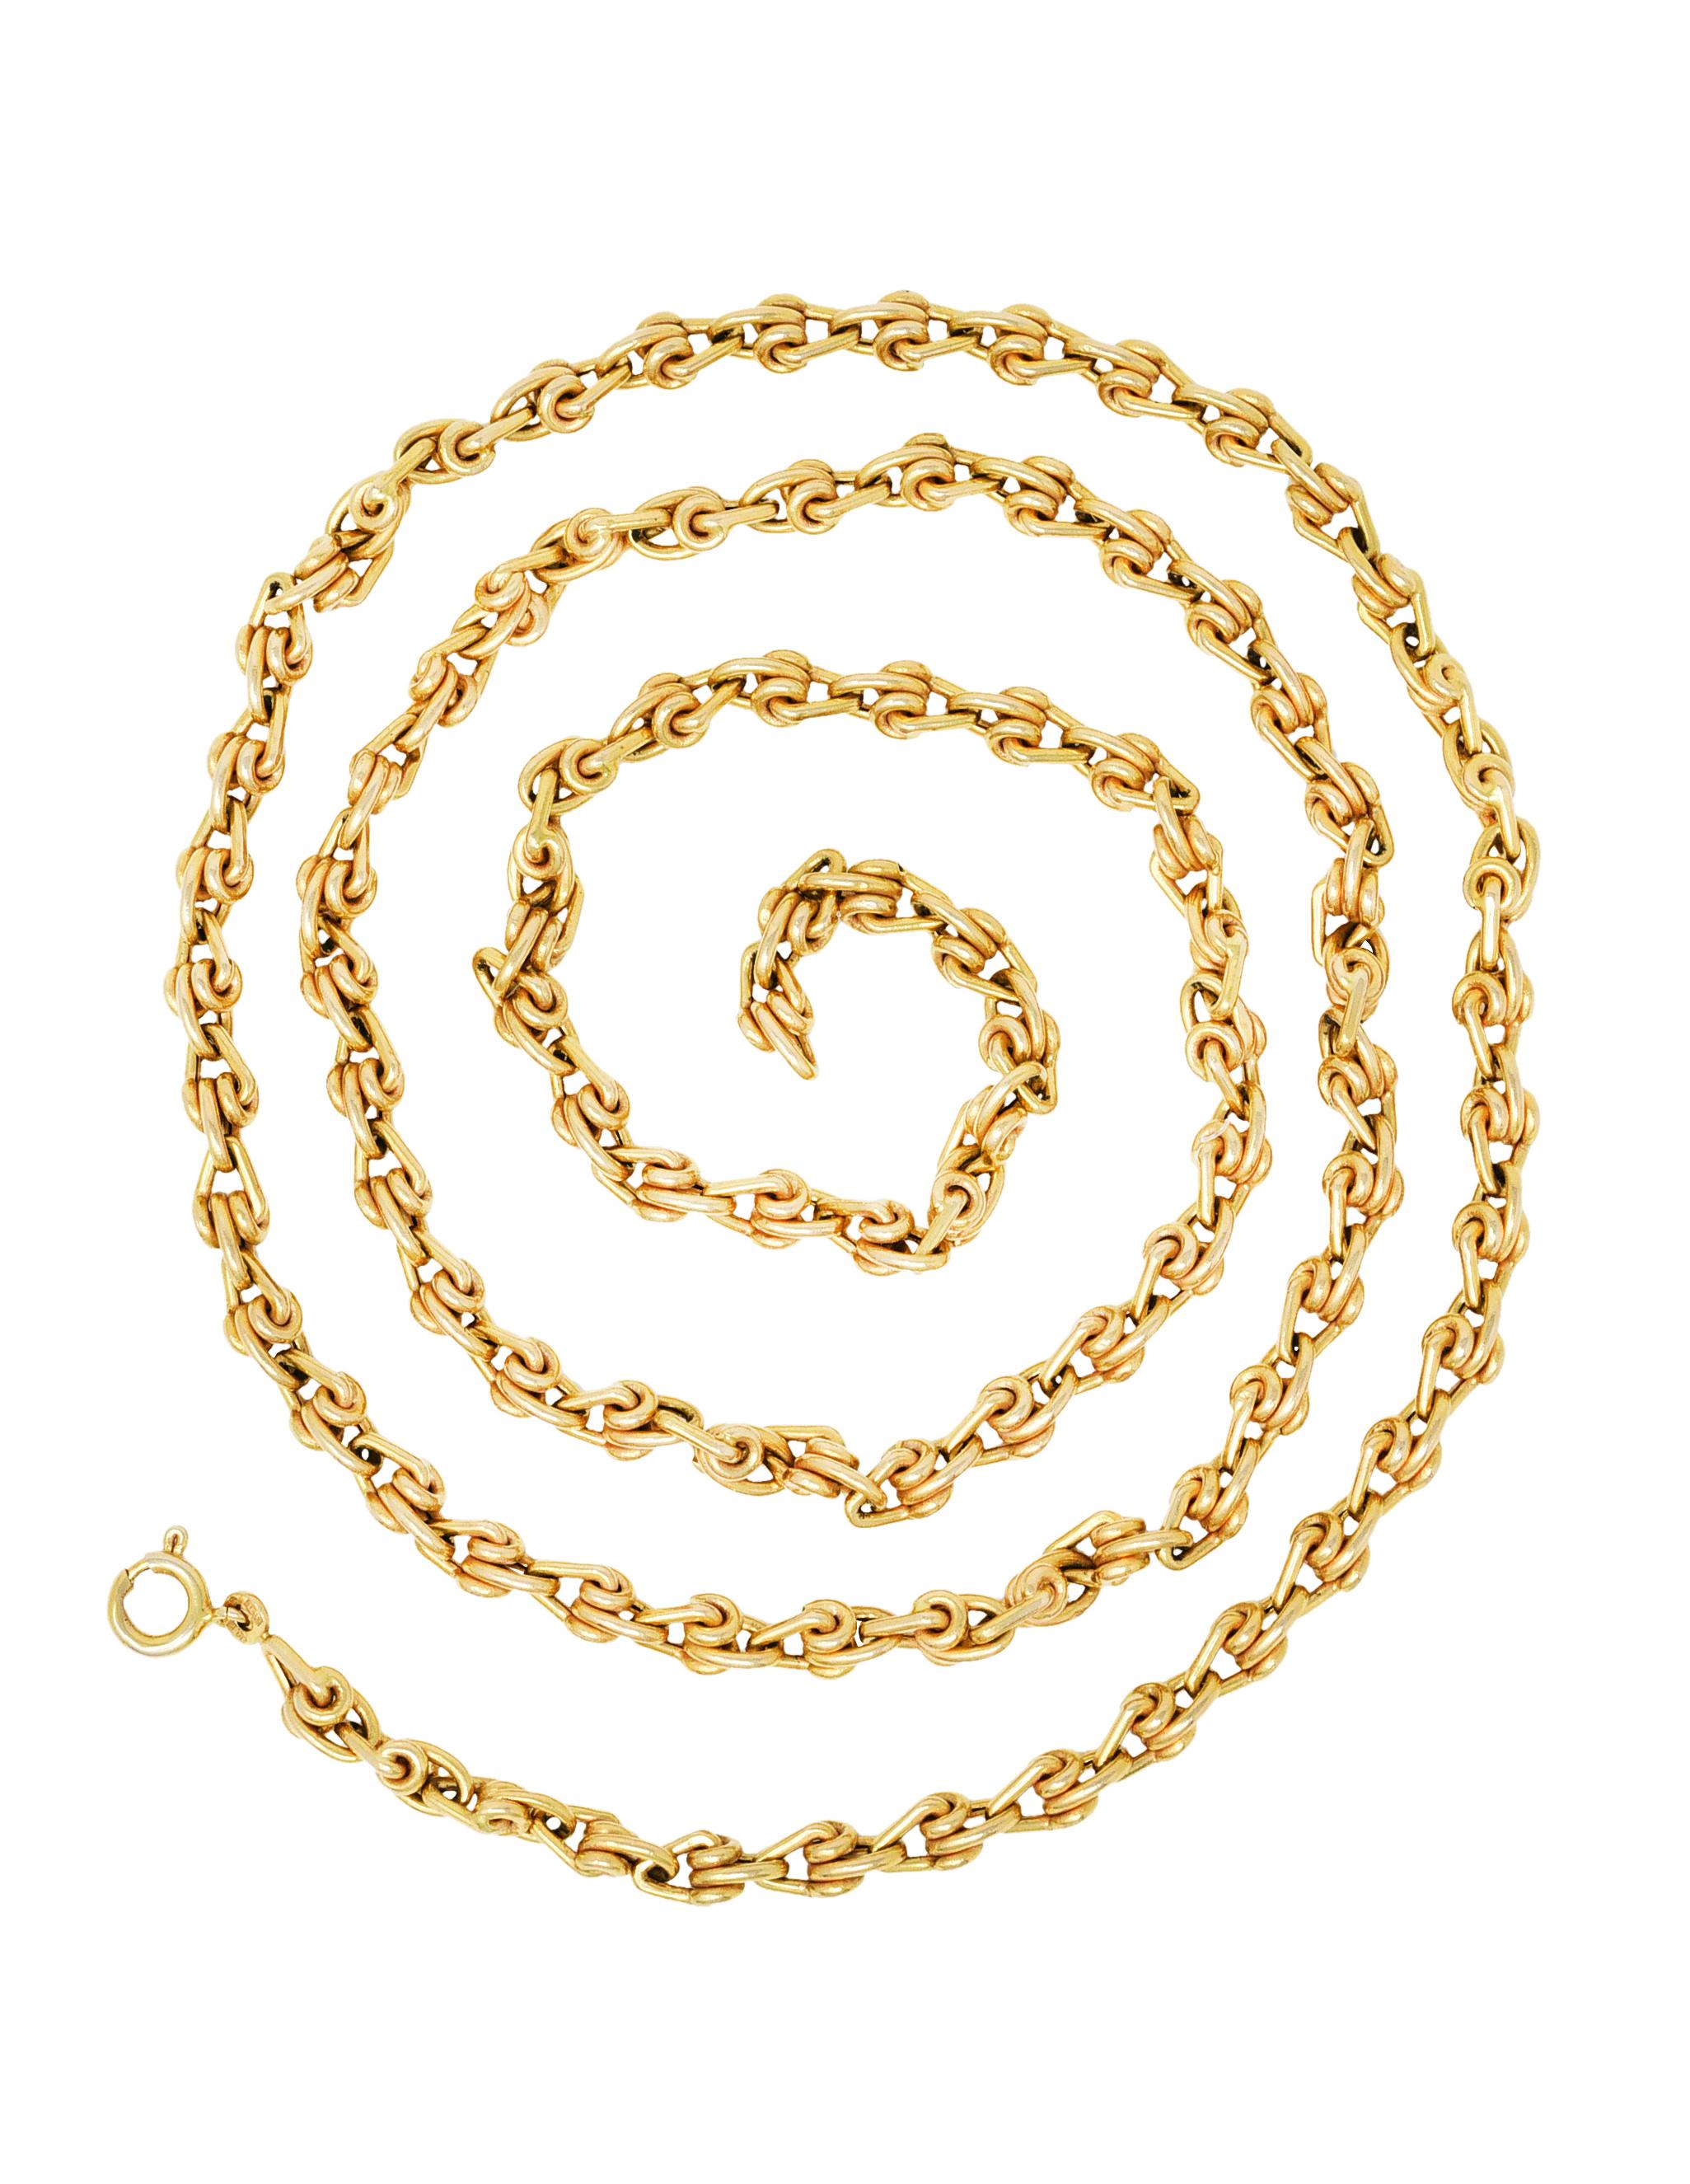 Long chain necklace is comprised of fabricated links

Designed as stylized interconnected coils

Completes as a spring ring clasp

Stamped 585 and 14K for 14 karat gold

Emblazoned Italy and signed Unoaerre

Length: 32 inches

Width: 3/16